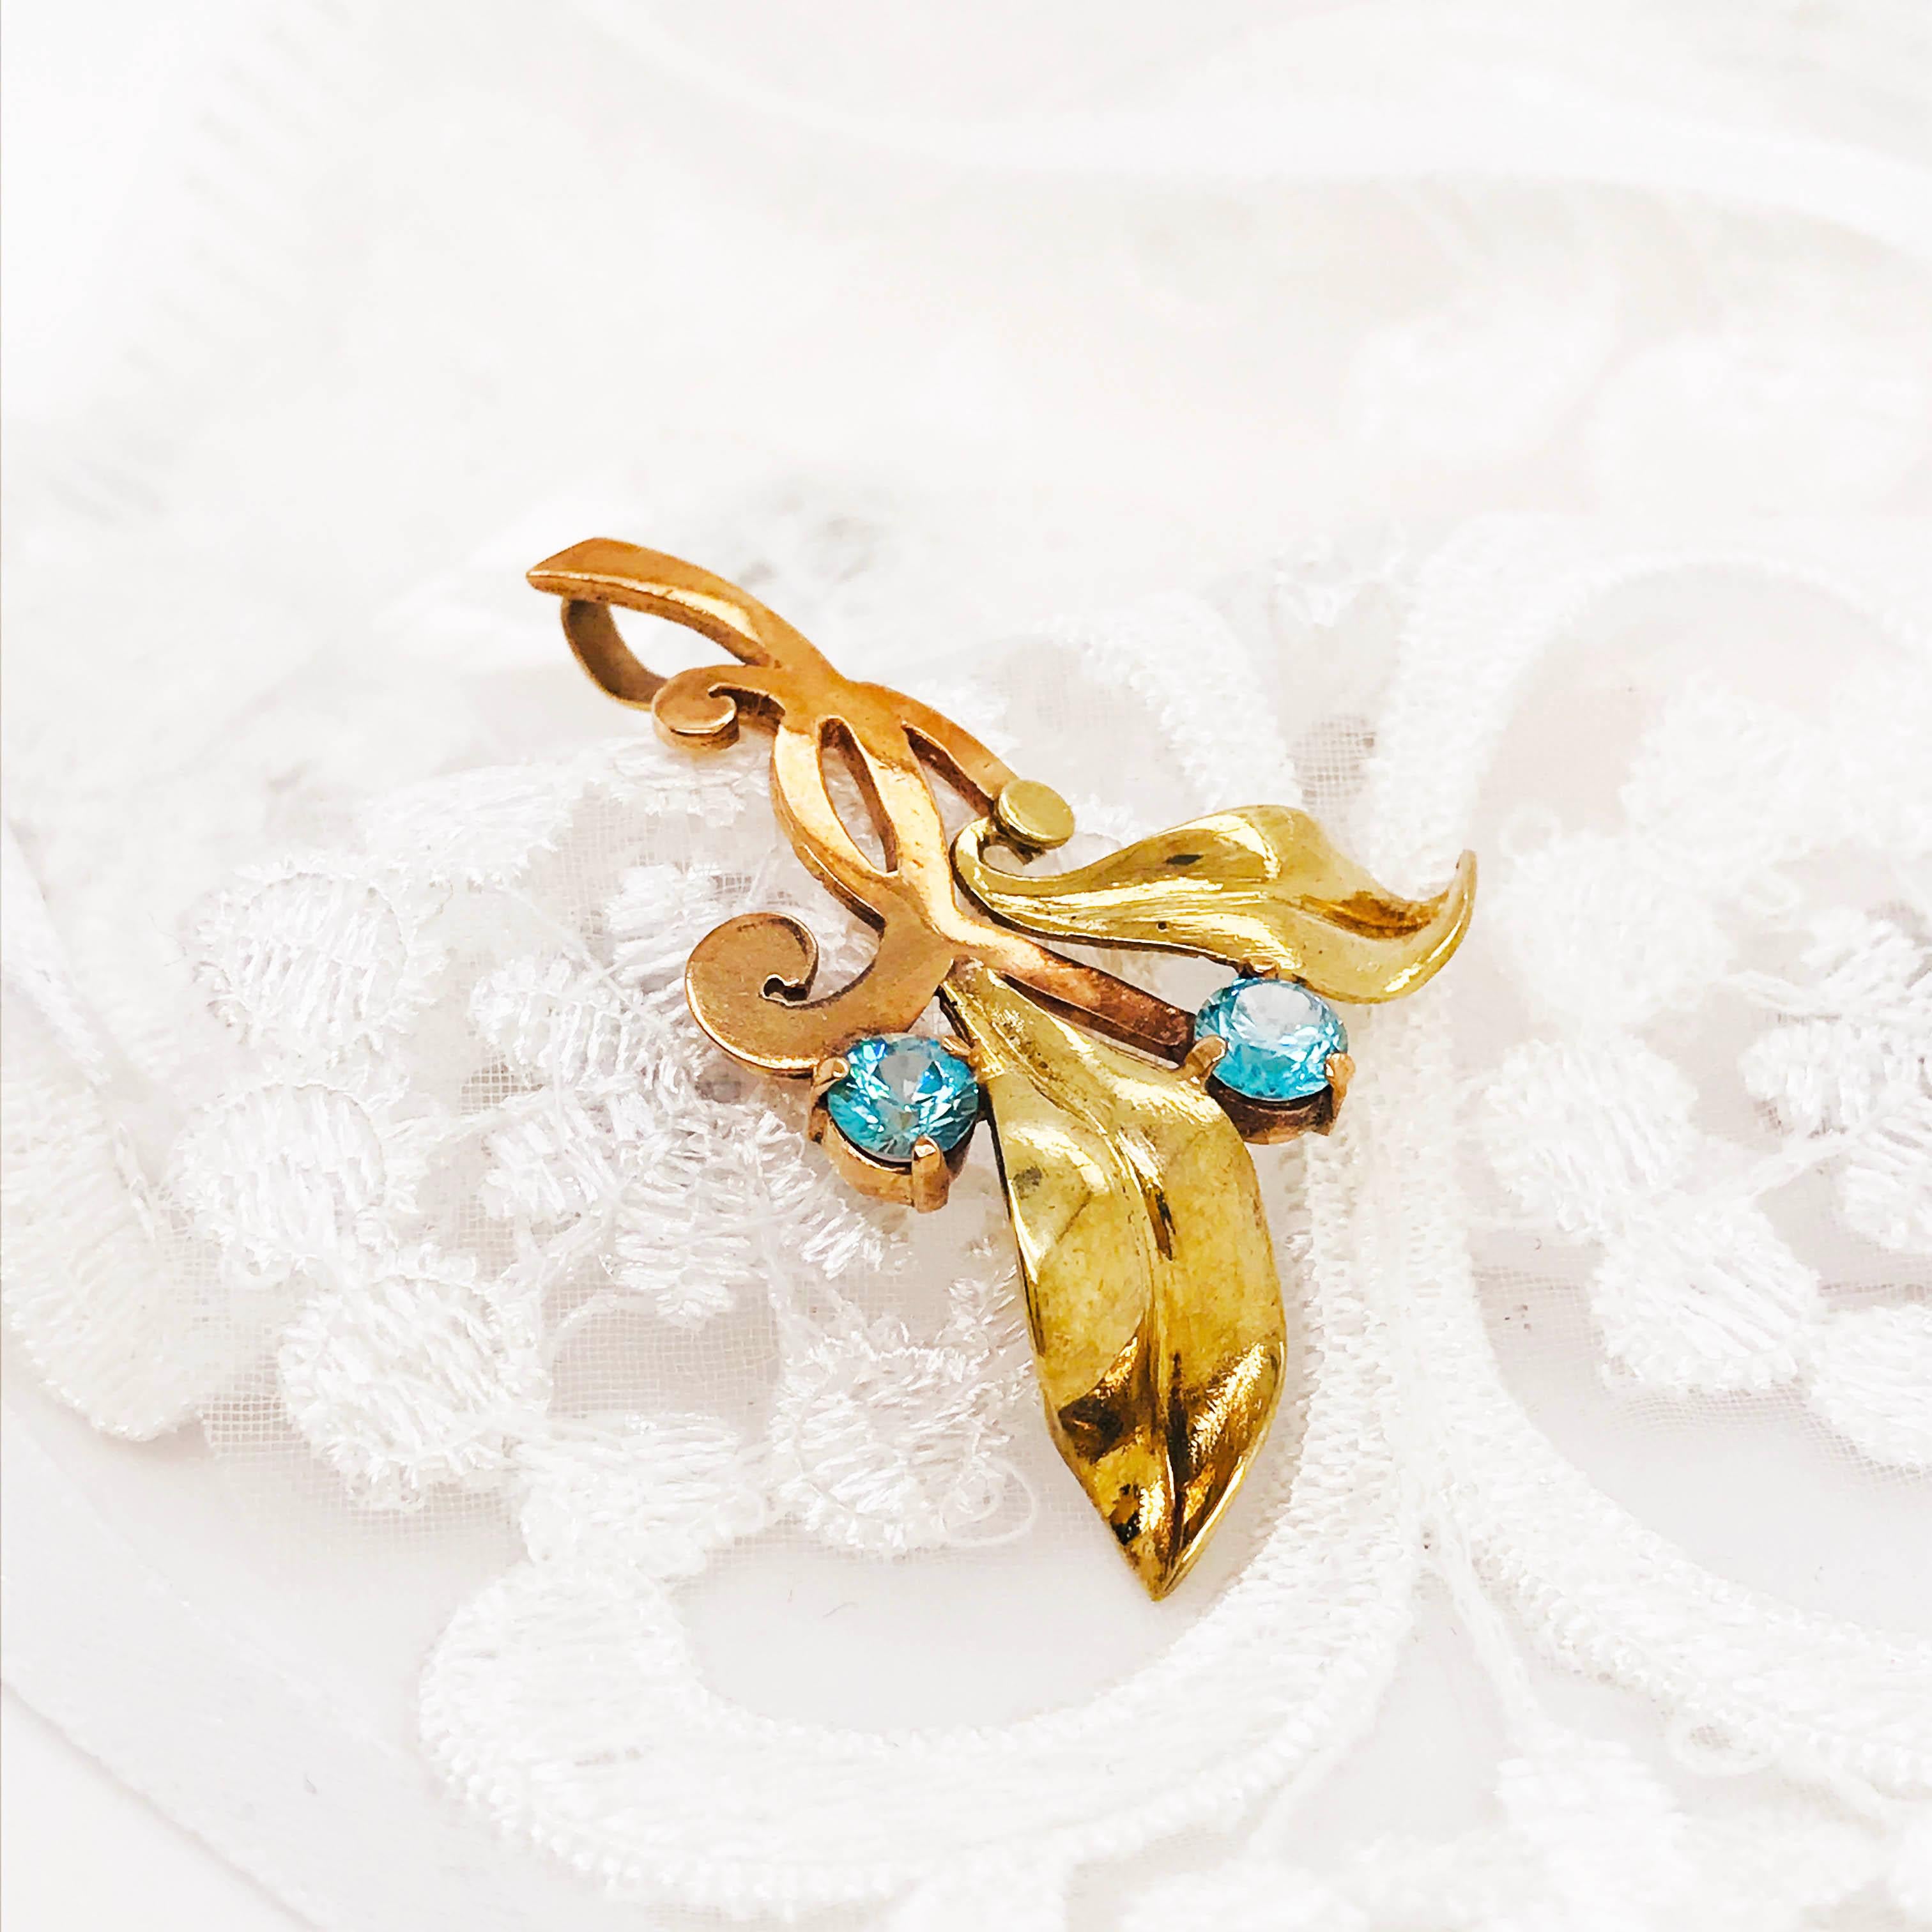 CIRCA 1950 1.00 Carat Swiss Blue Topaz Leaf Pendant in 18K Yellow and Rose Gold! How unique is this piece? This blue topaz Pendant has an ornate leaf design with two genuine Swiss blue topaz gemstones set in a balanced design. This is an estate,